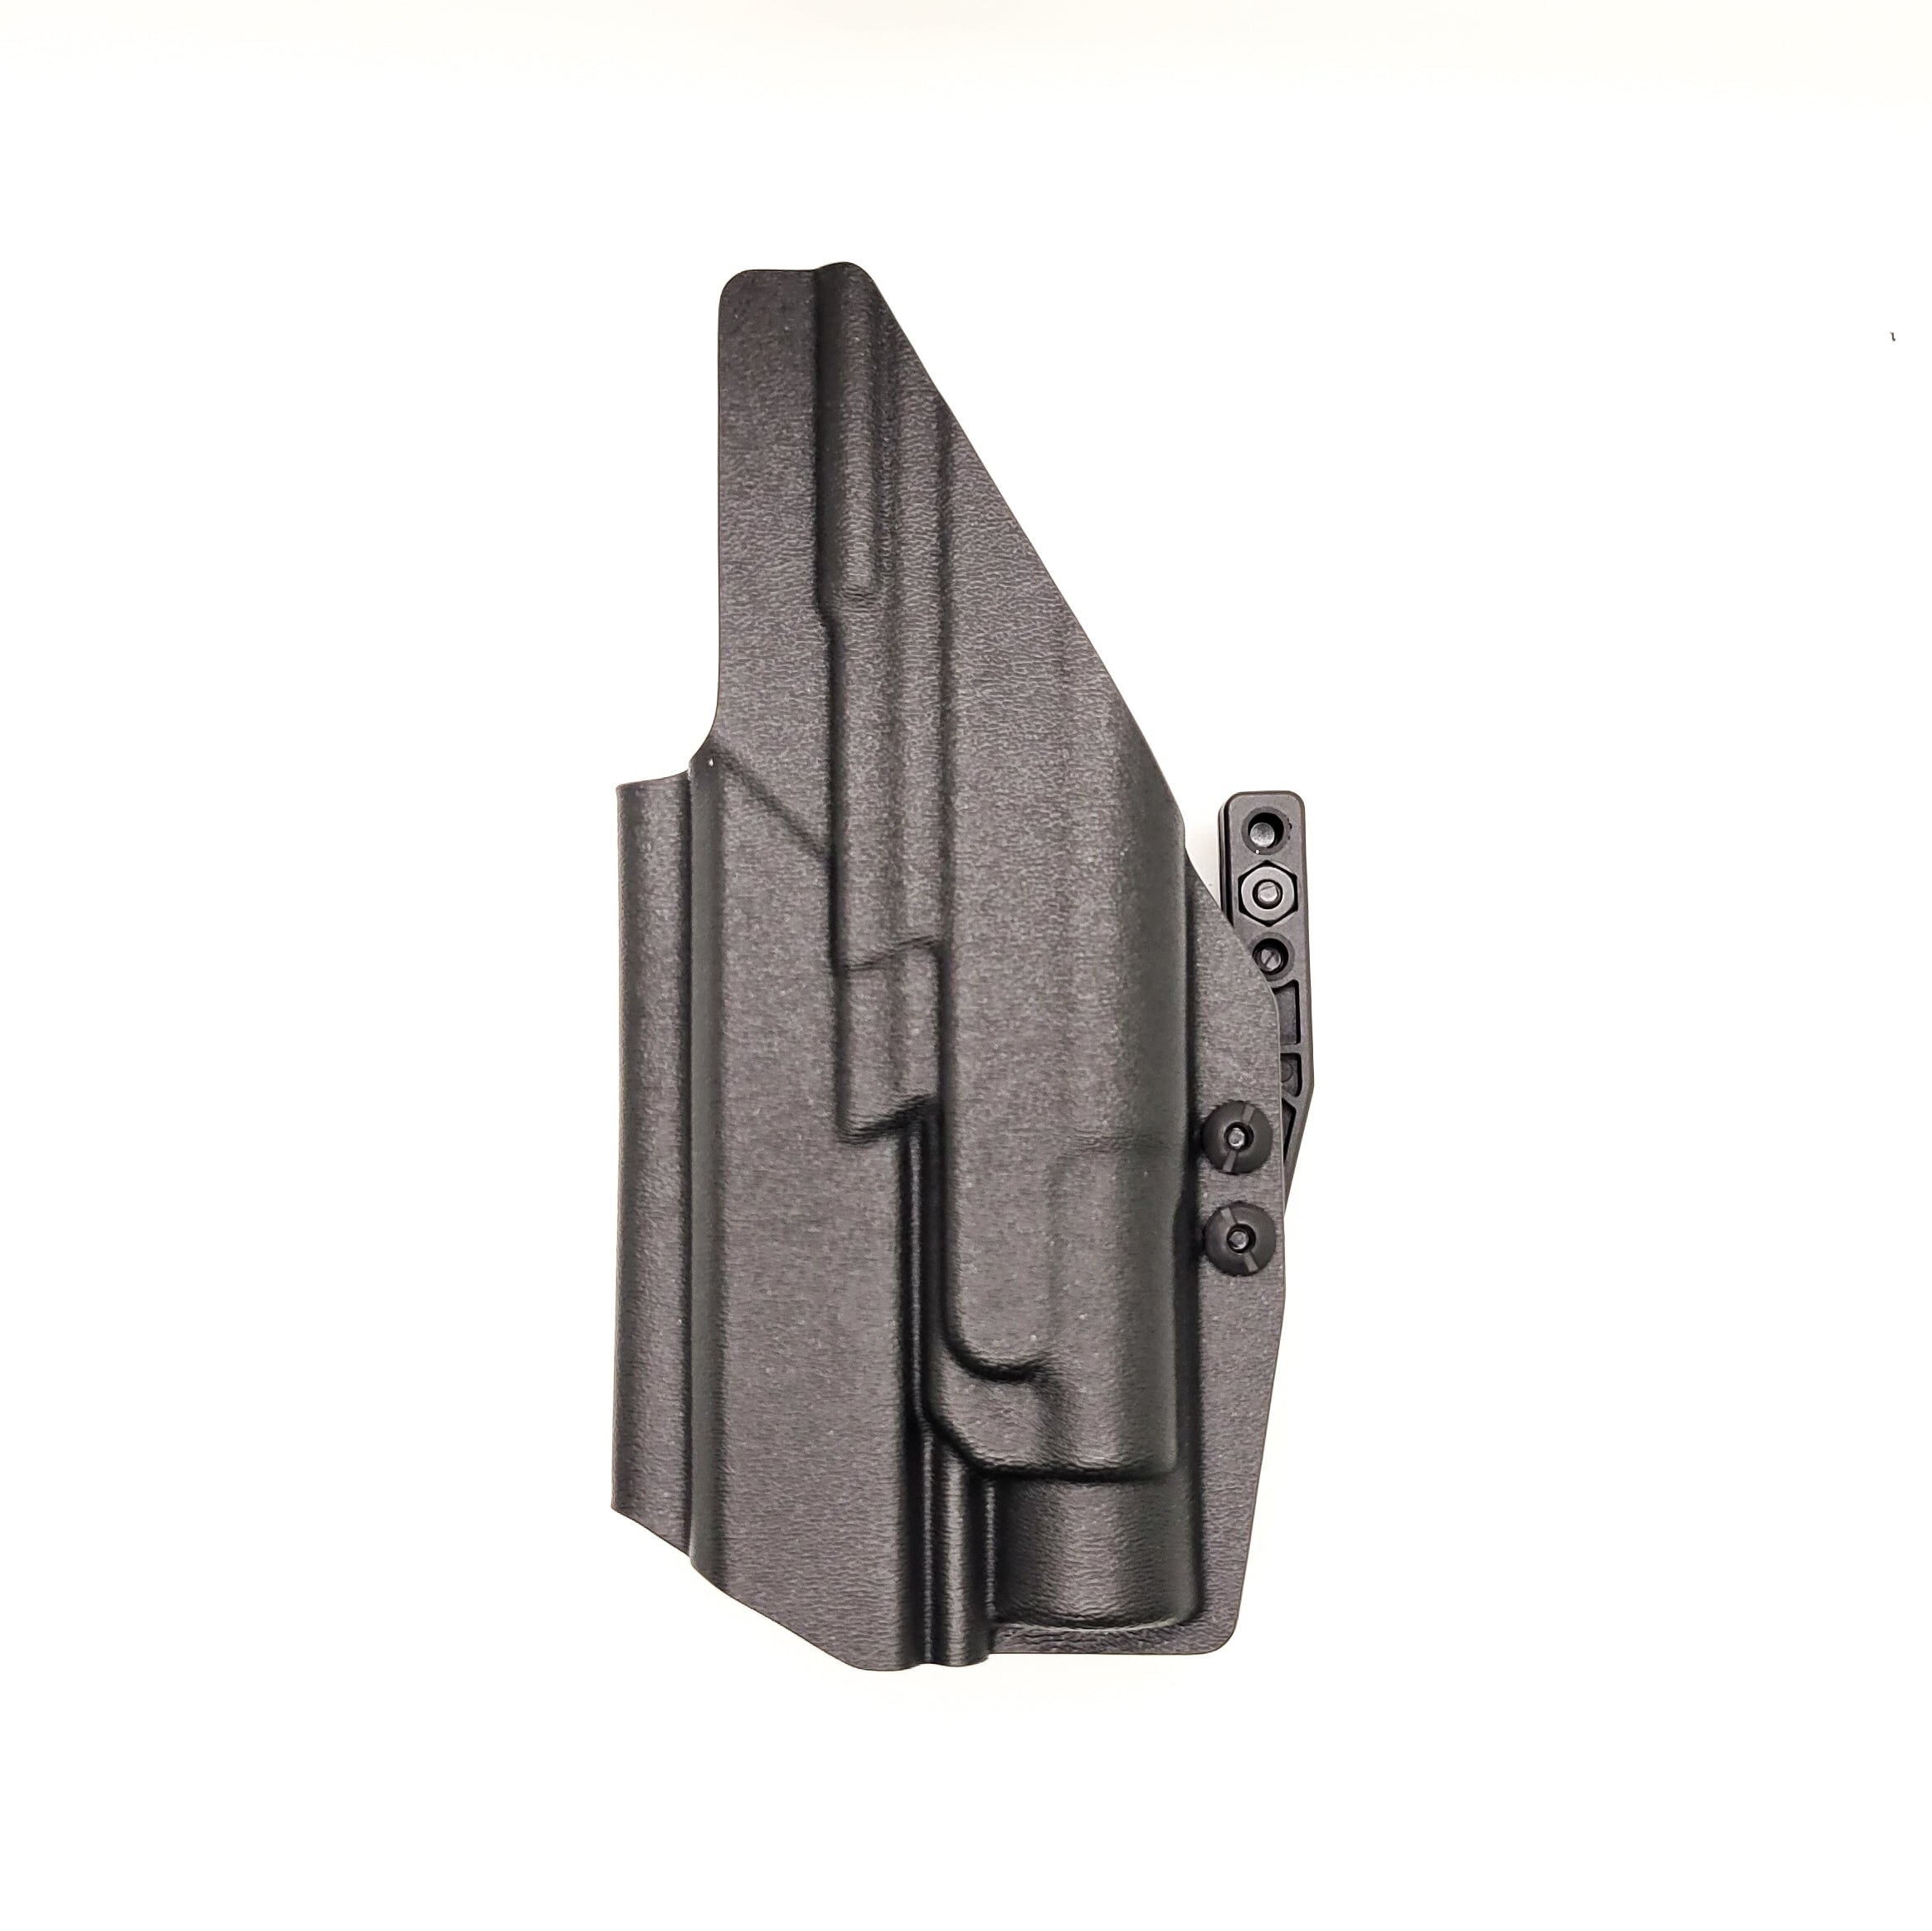 For the best IWB Inside Waistband Holster designed to fit the Springfield Armory Echelon and Streamlight TLR-7A, shop Four Brothers Holsters. Full sweat guard, adjustable retention, clear dor a red dot sight, minimal material & smooth edges to reduce printing. Proudly made in the USA by veterans and law enforcement.